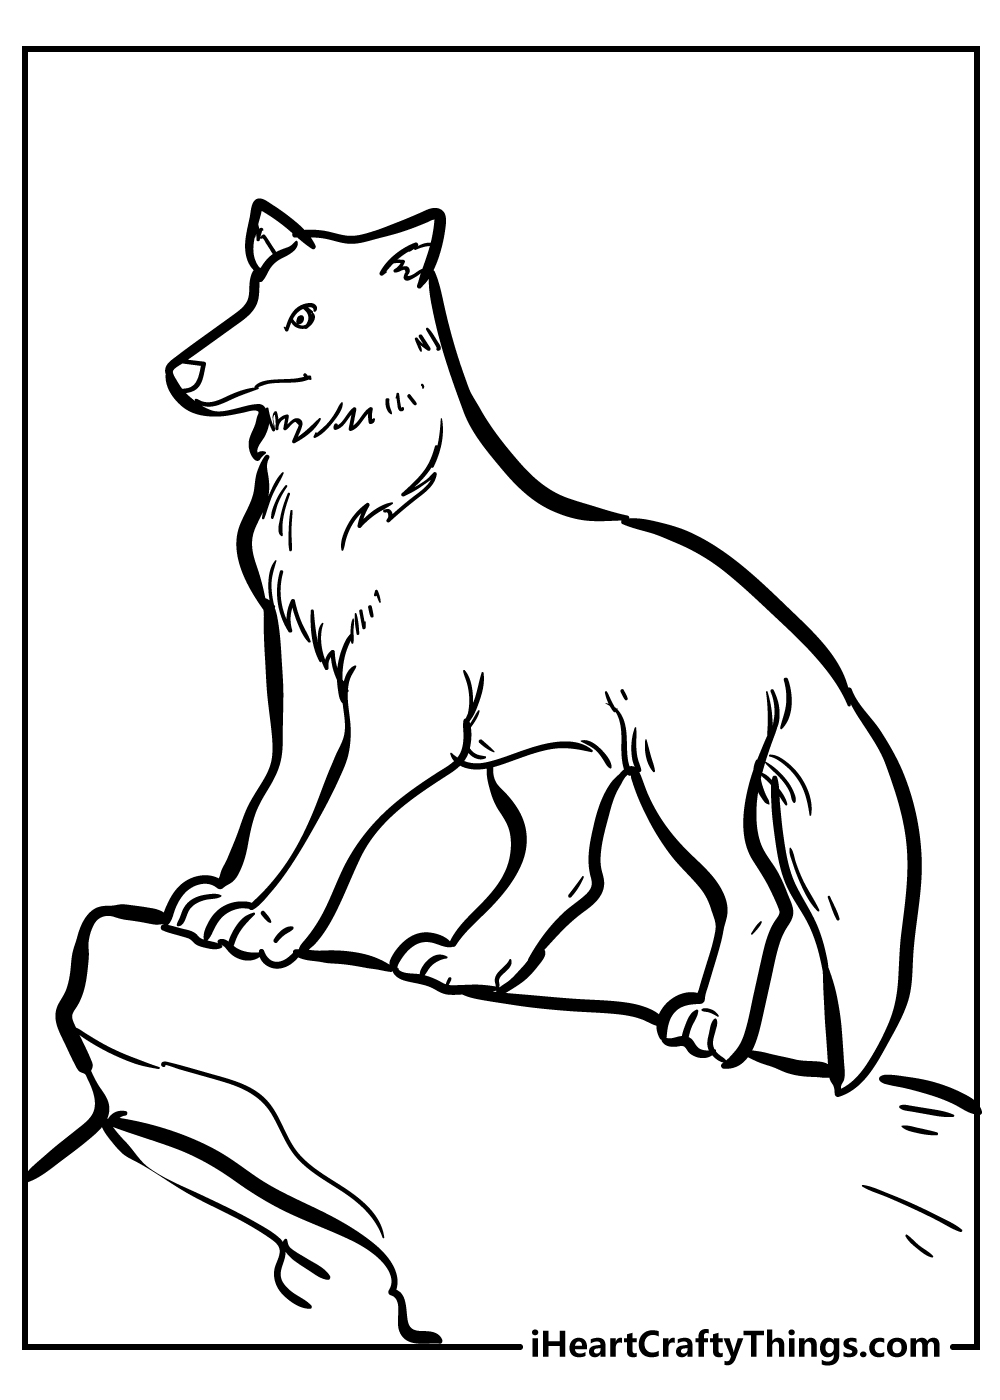 Wolf coloring sheet for children free download